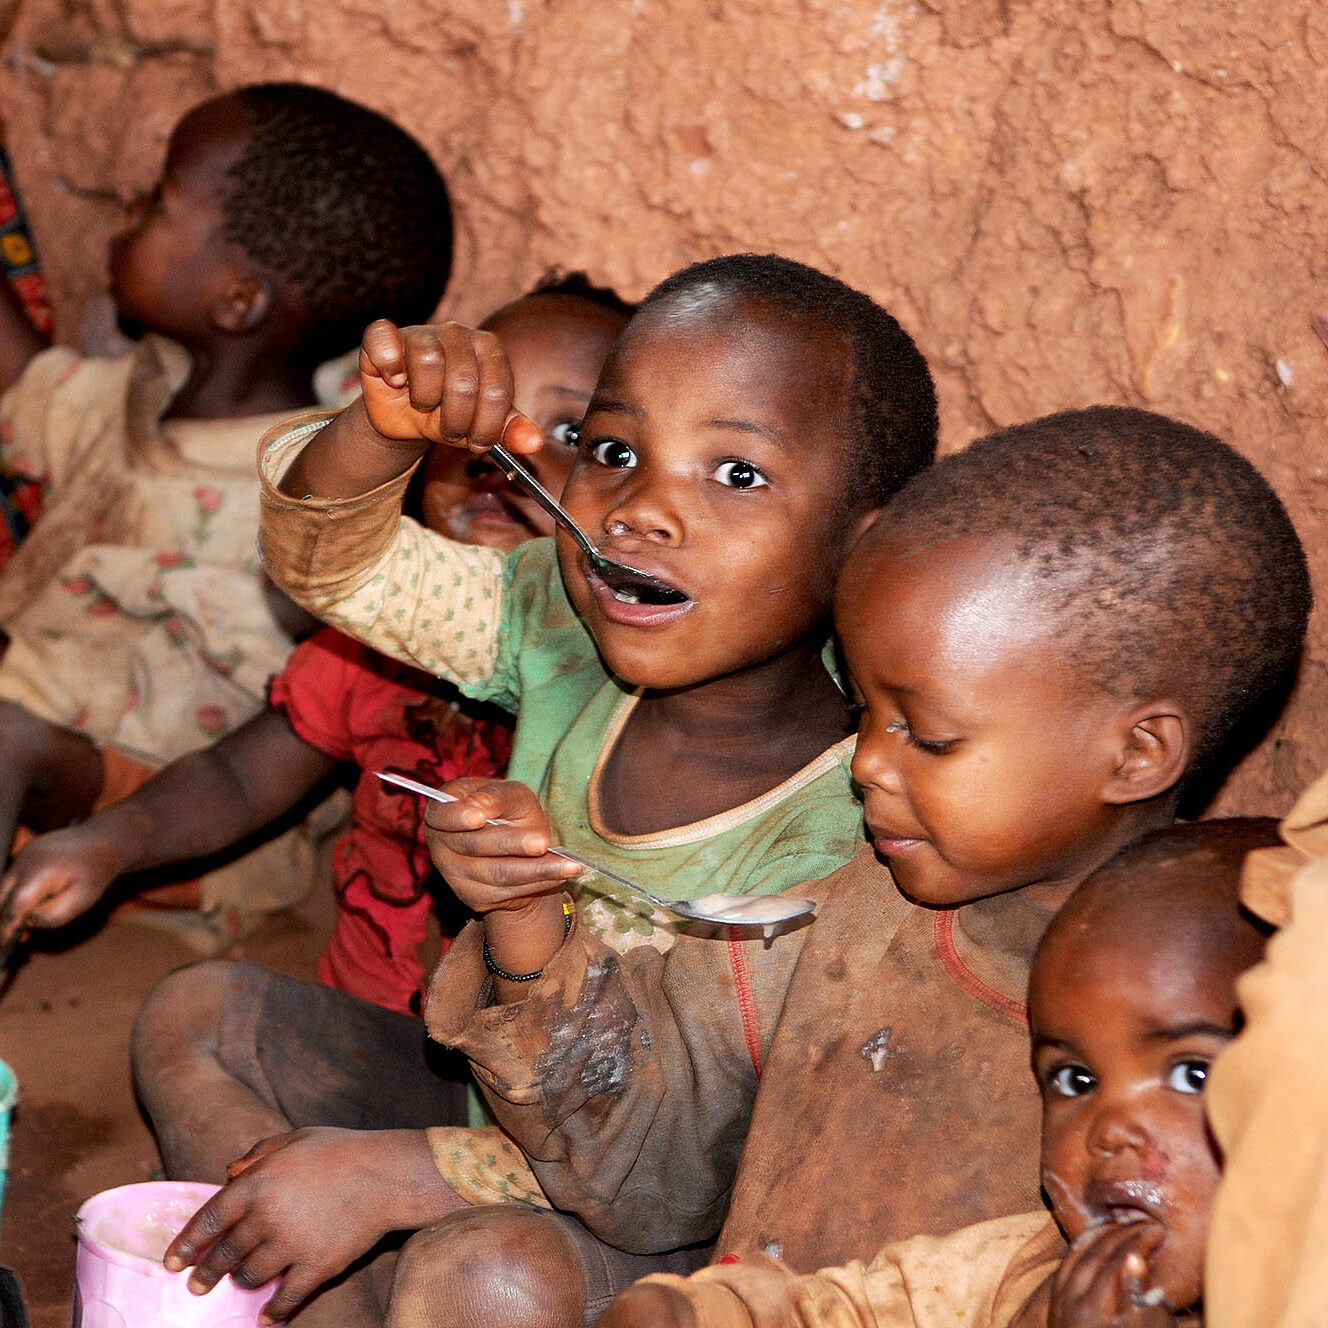 Children in Burundi eating with bright expressions of enjoyment